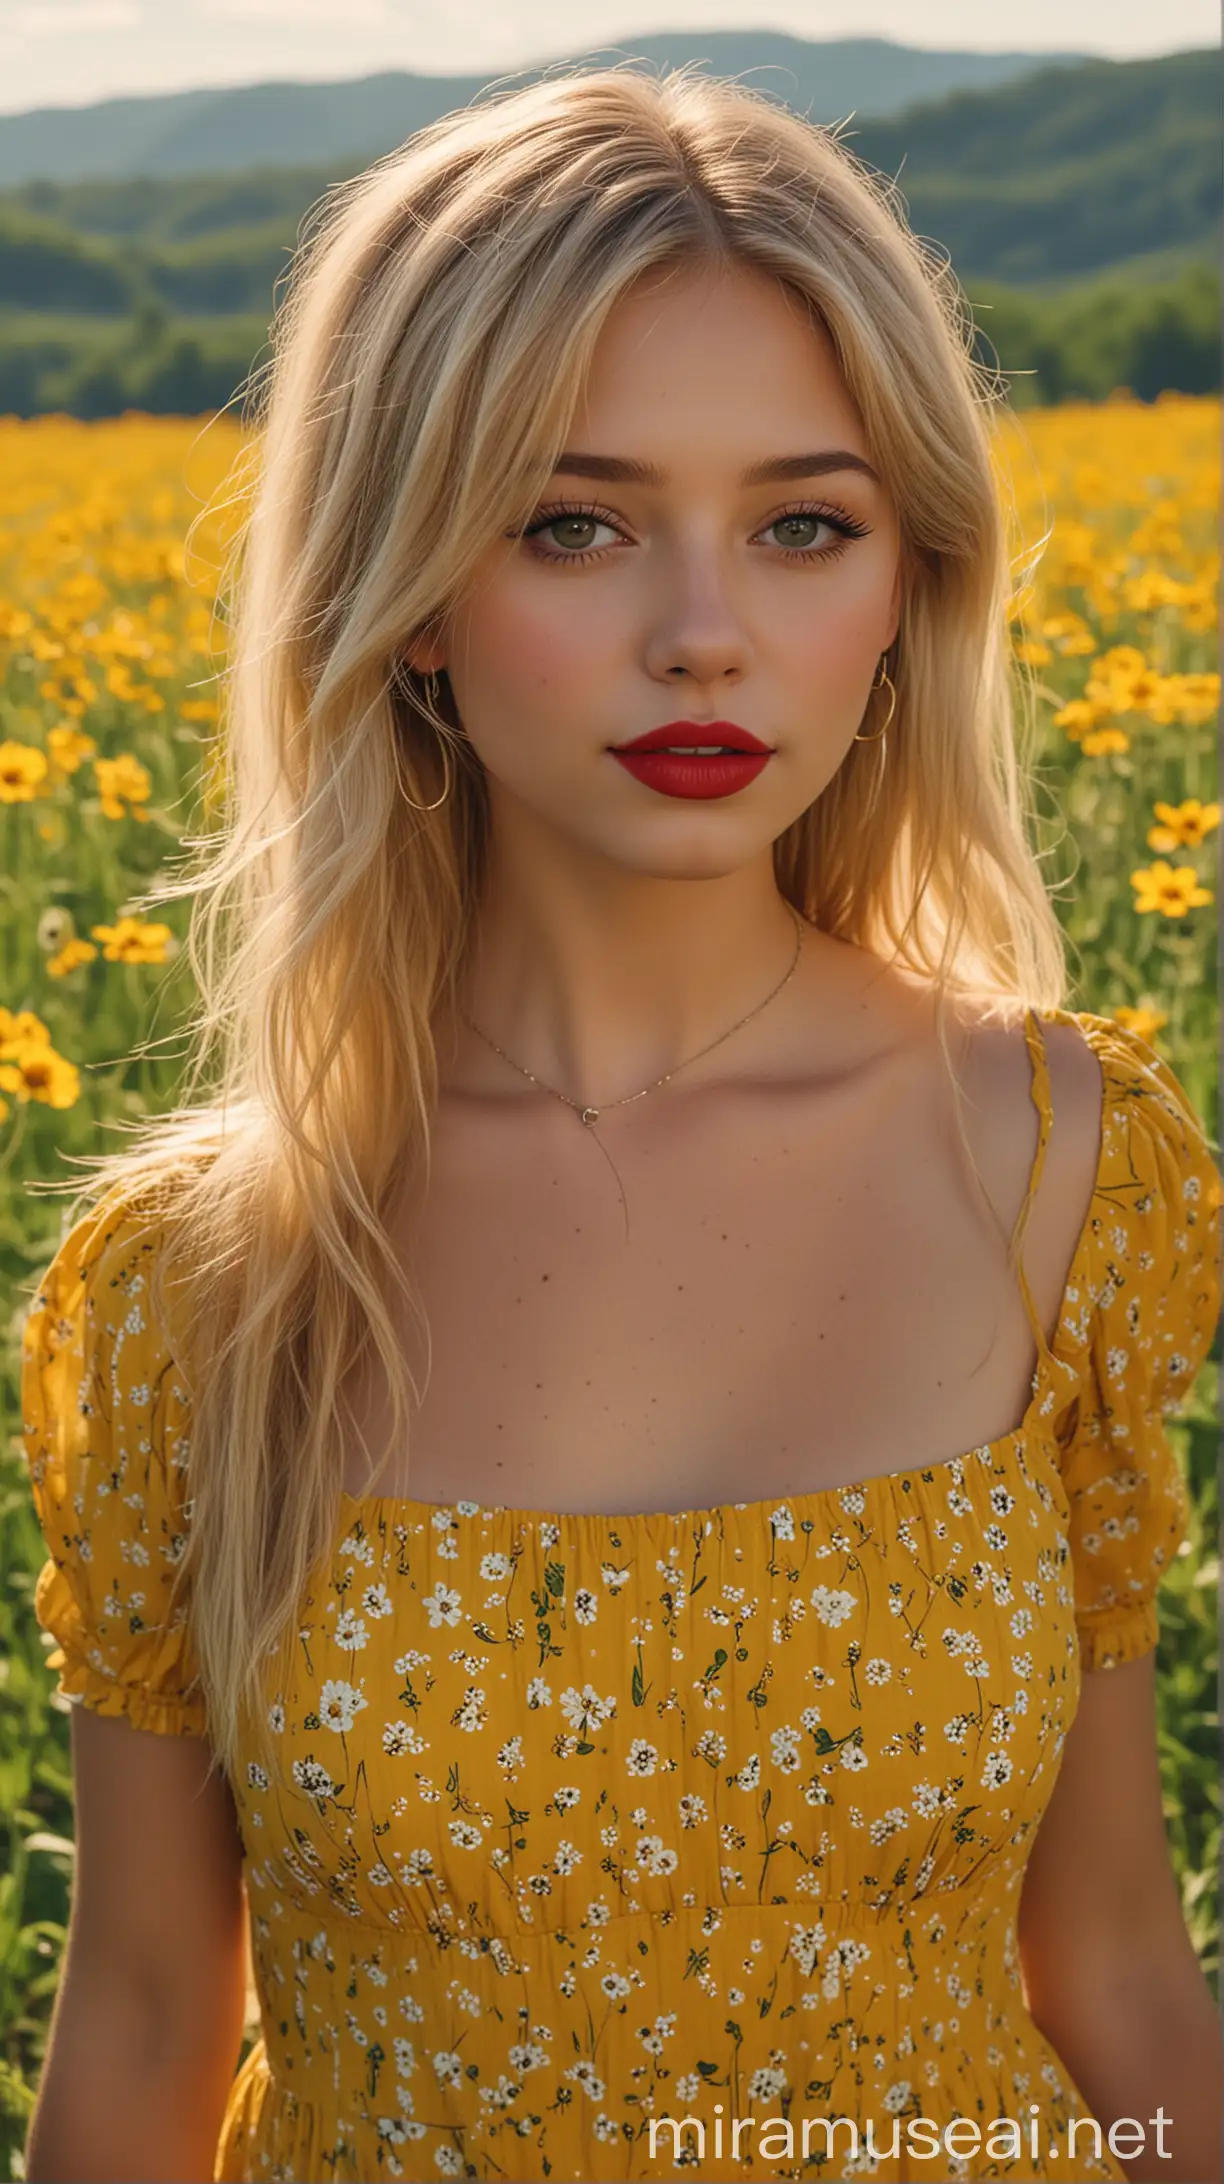 Beautiful USA Girl with Golden Hair and Red Lipstick in Wildflower Fields